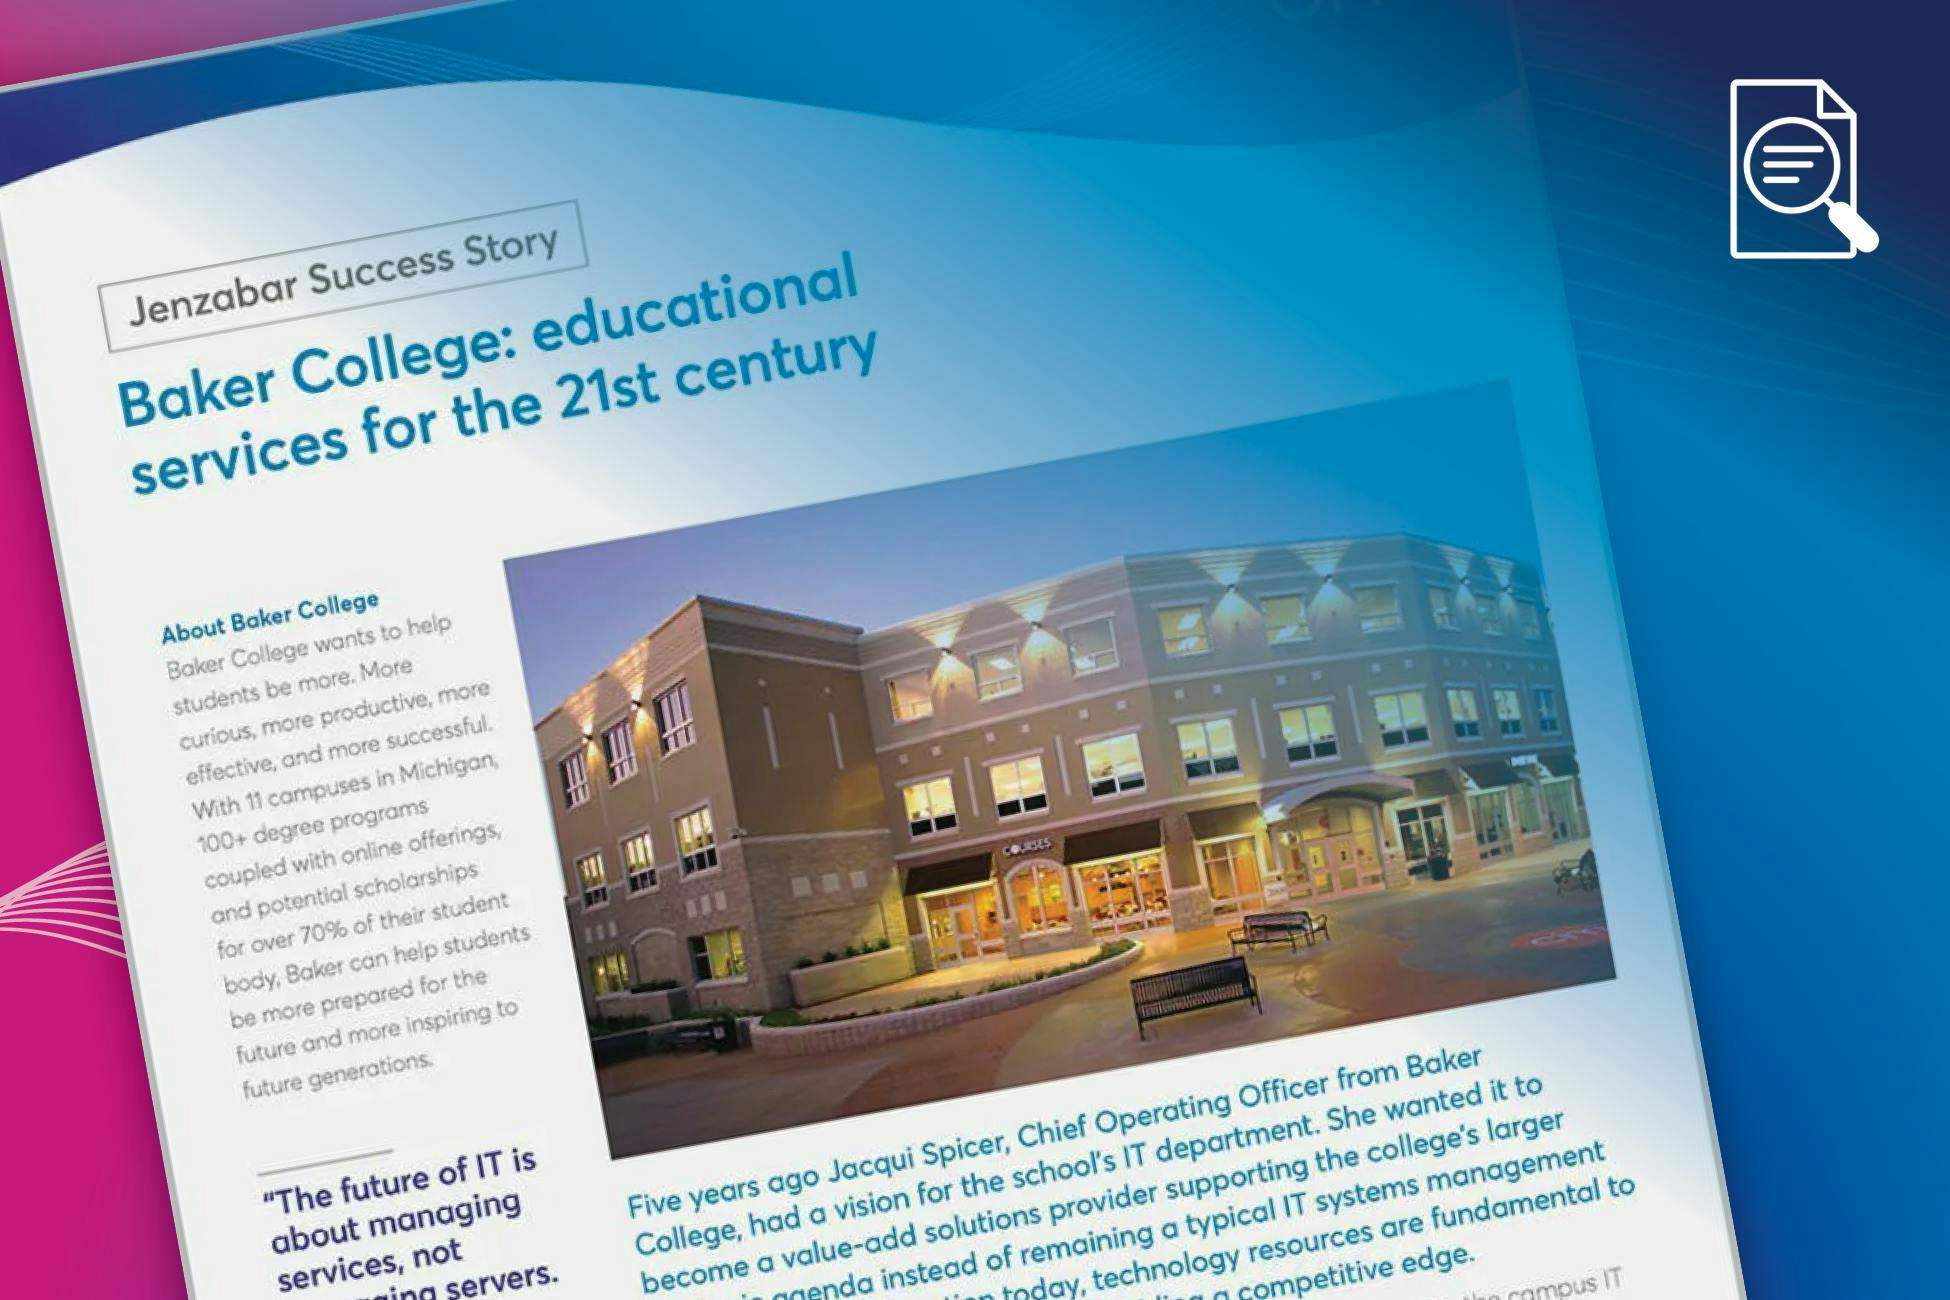 Case Study: Baker College Modernizes Their IT Infrastructure While Still Containing Costs